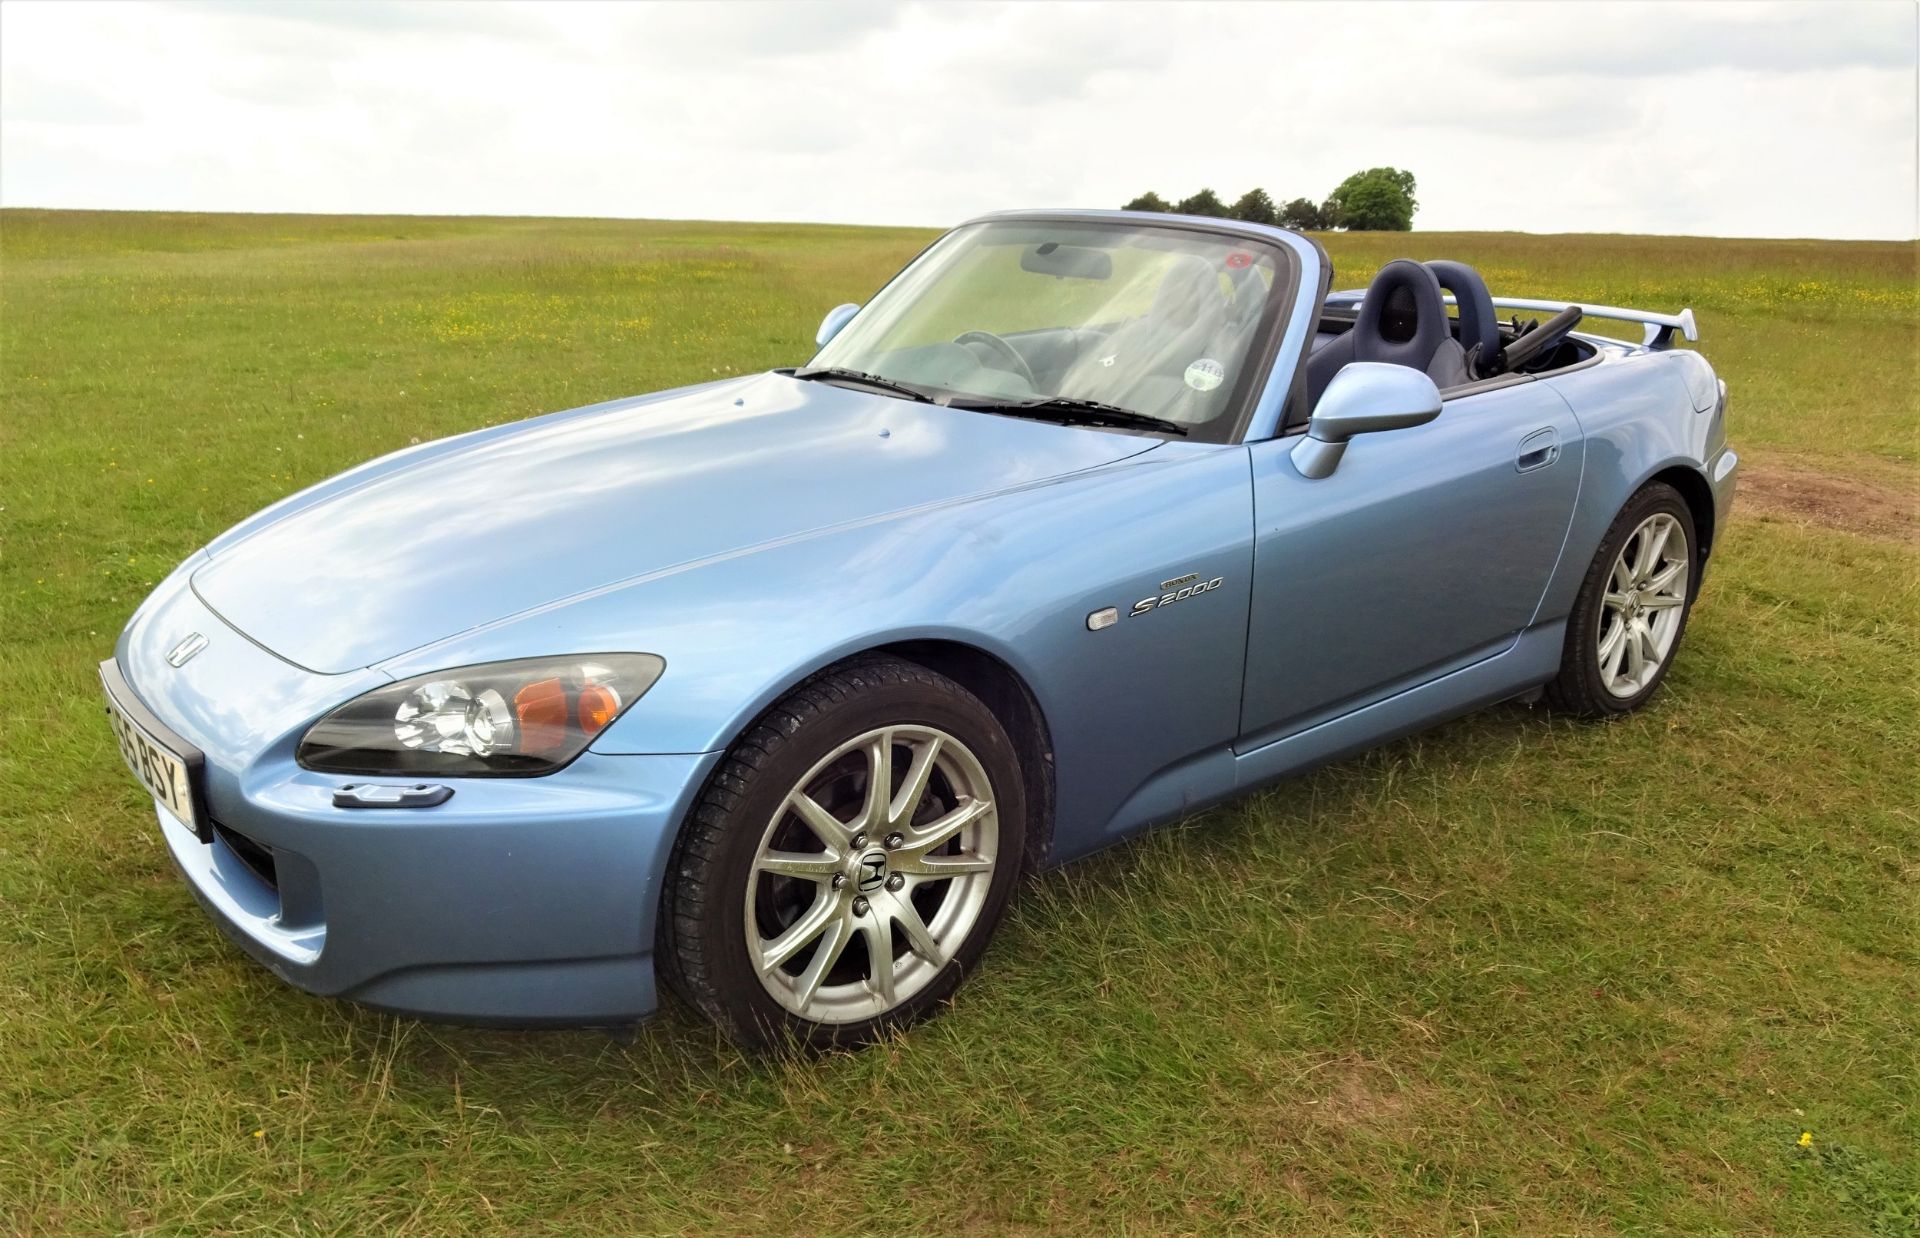 2005 HONDA S2000 Registration Number: RJ55 BSY Chassis Number: JHMPA11305S202028 - In current - Bild 3 aus 15